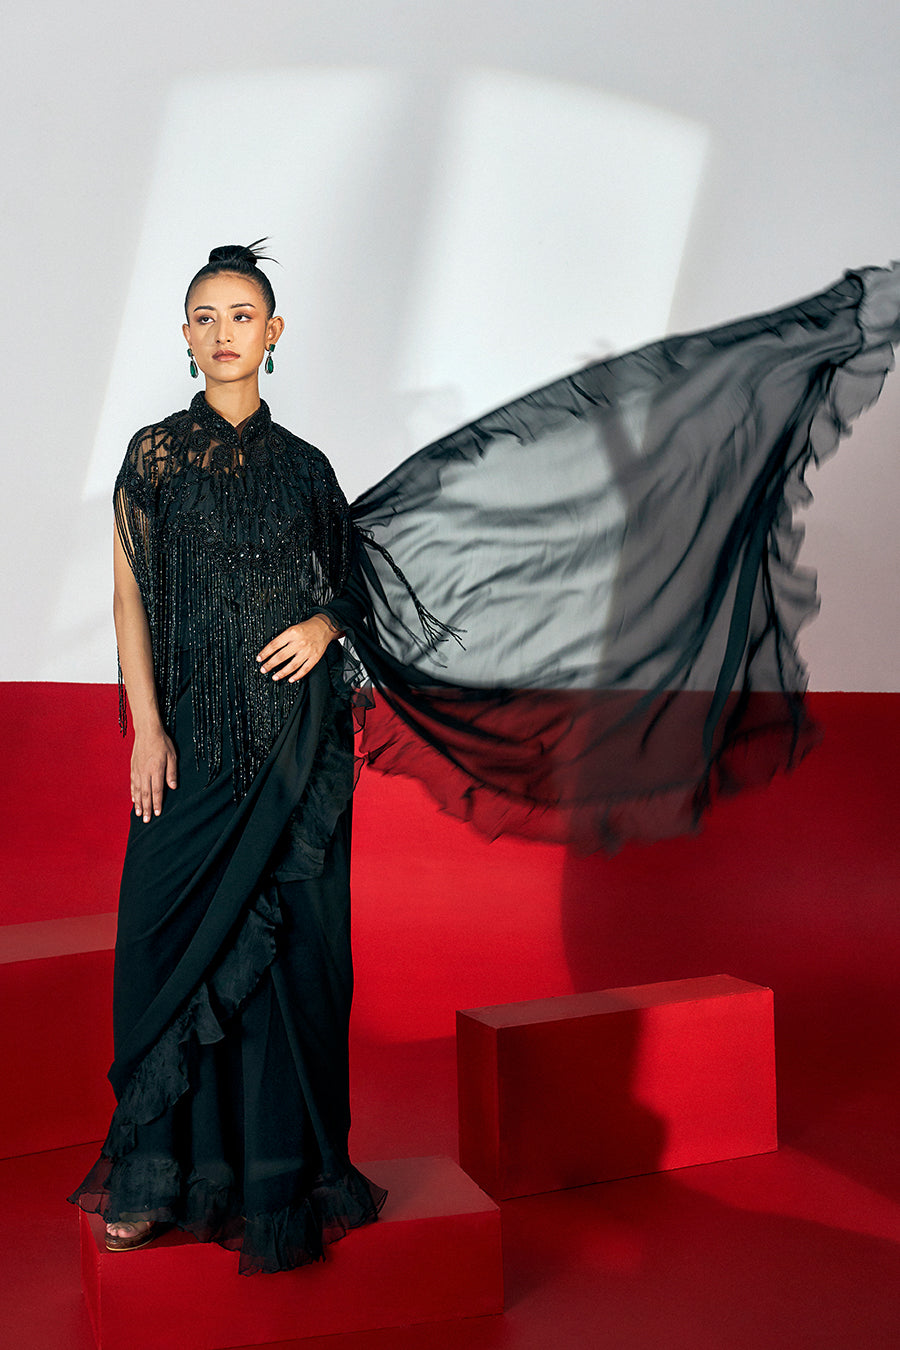 Ruffle Saree & Black Embroidered Cape With Tassles